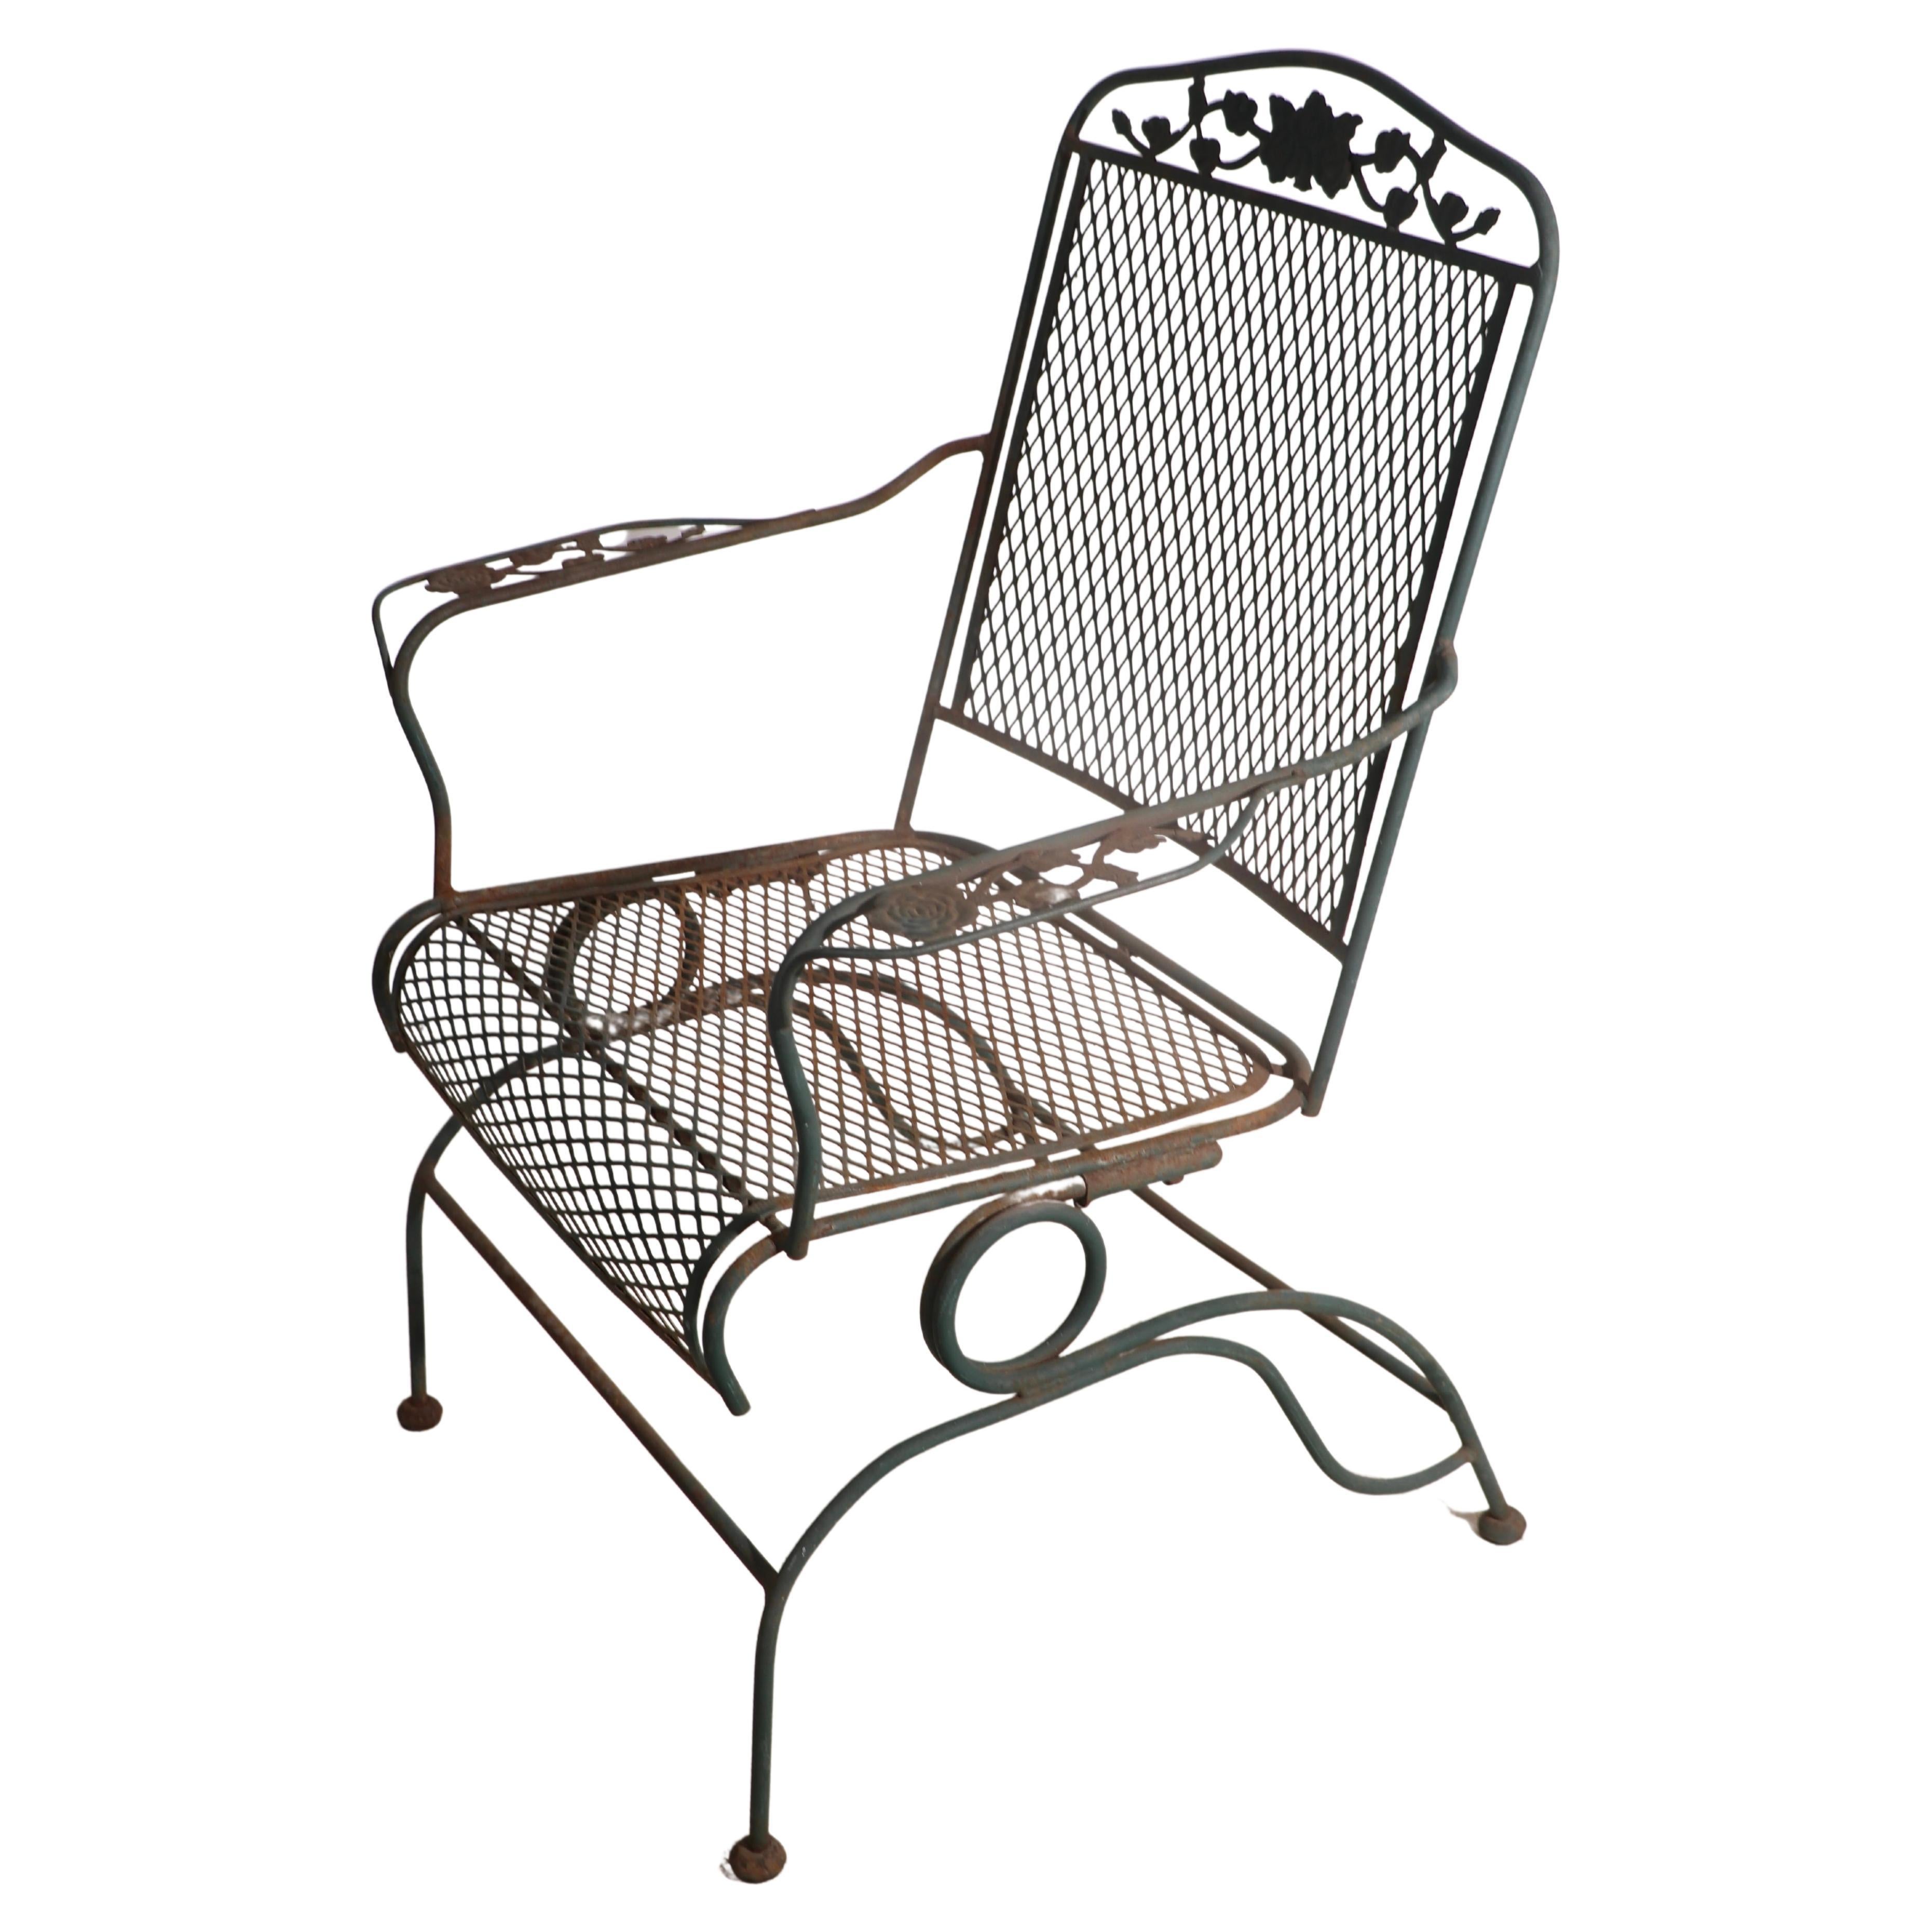 Meadowcraft Dogwood Garden Patio Poolside Spring Seat Lounge Chair